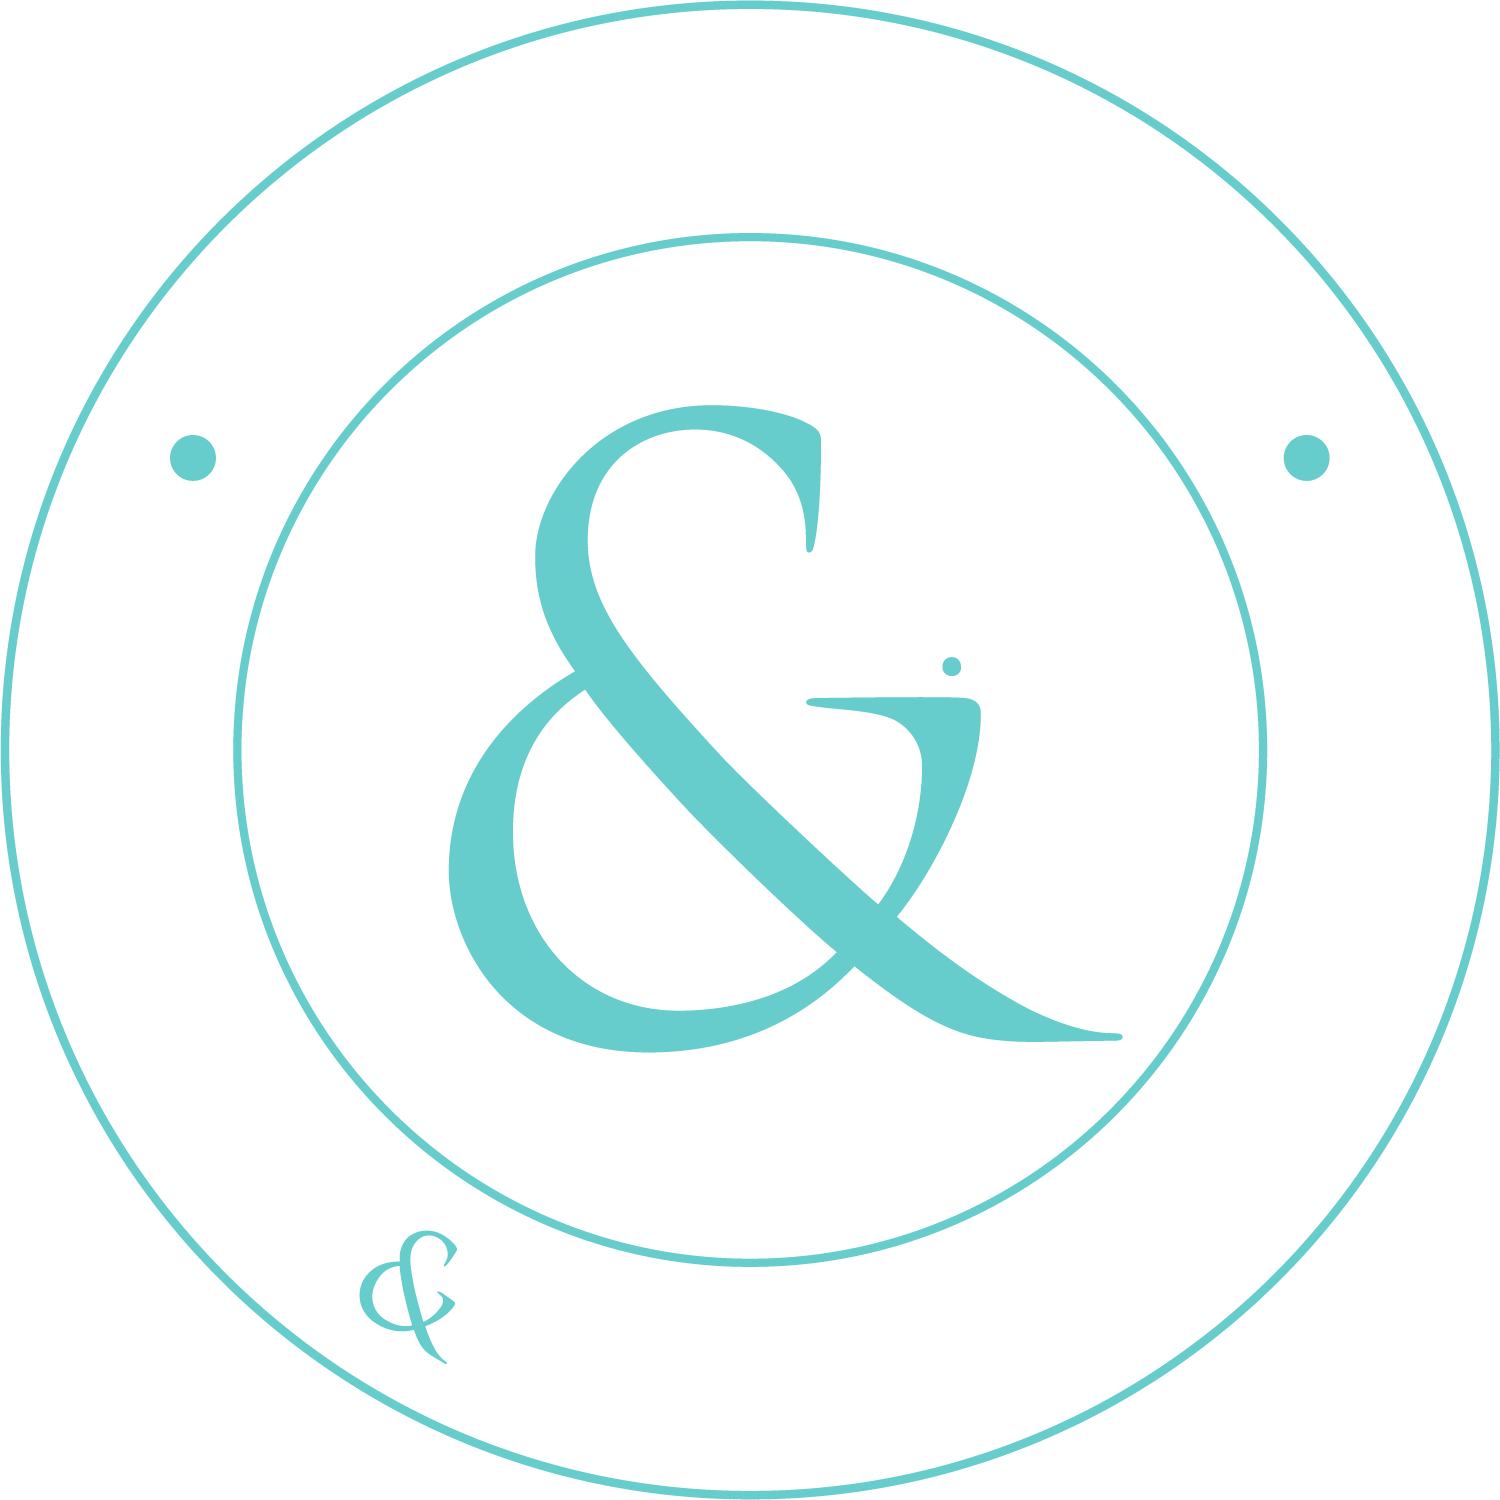 thornhill and co logo a white ampersand with blue letters co. on it.